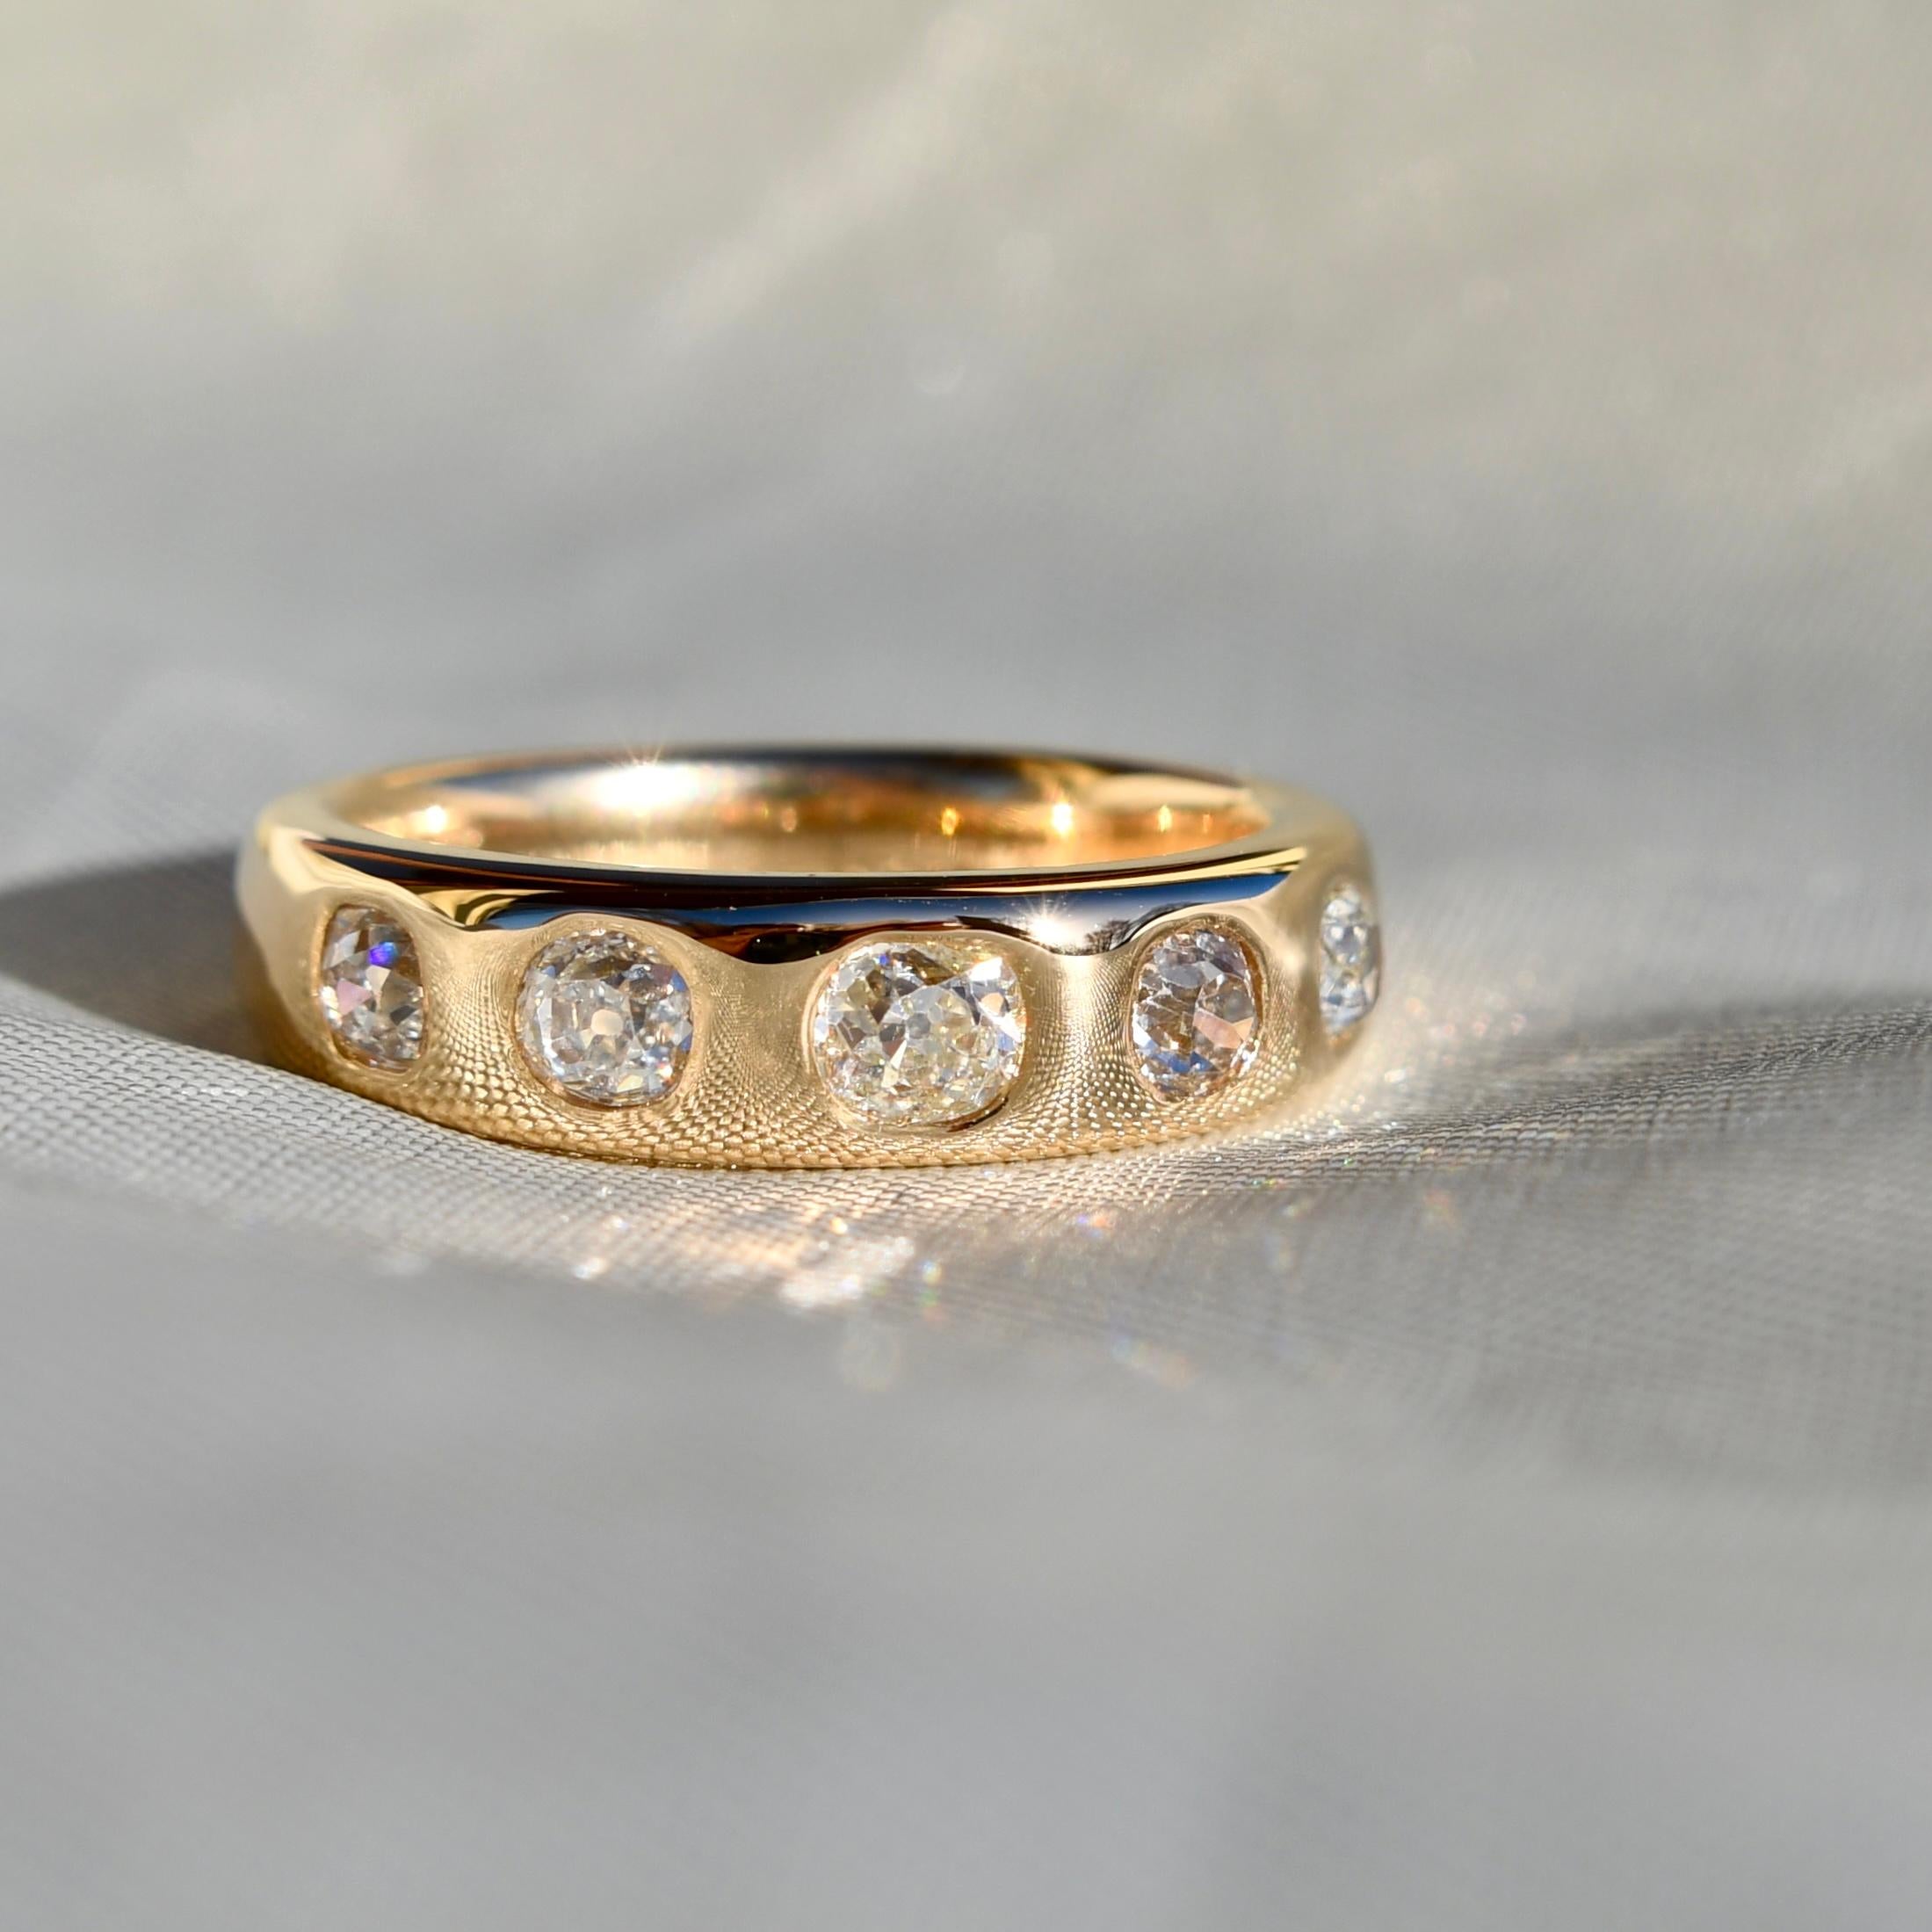 A newly made ring by Beaubijouxantique featuring antique old mine cut diamonds. 

All diamonds are H-M in color and VS1- SI1 in clarity, the diamonds have no signs of wear.

- One GIA certified old mine cut diamond, 0.29 ct (M/ SI1) 
- Four old mine